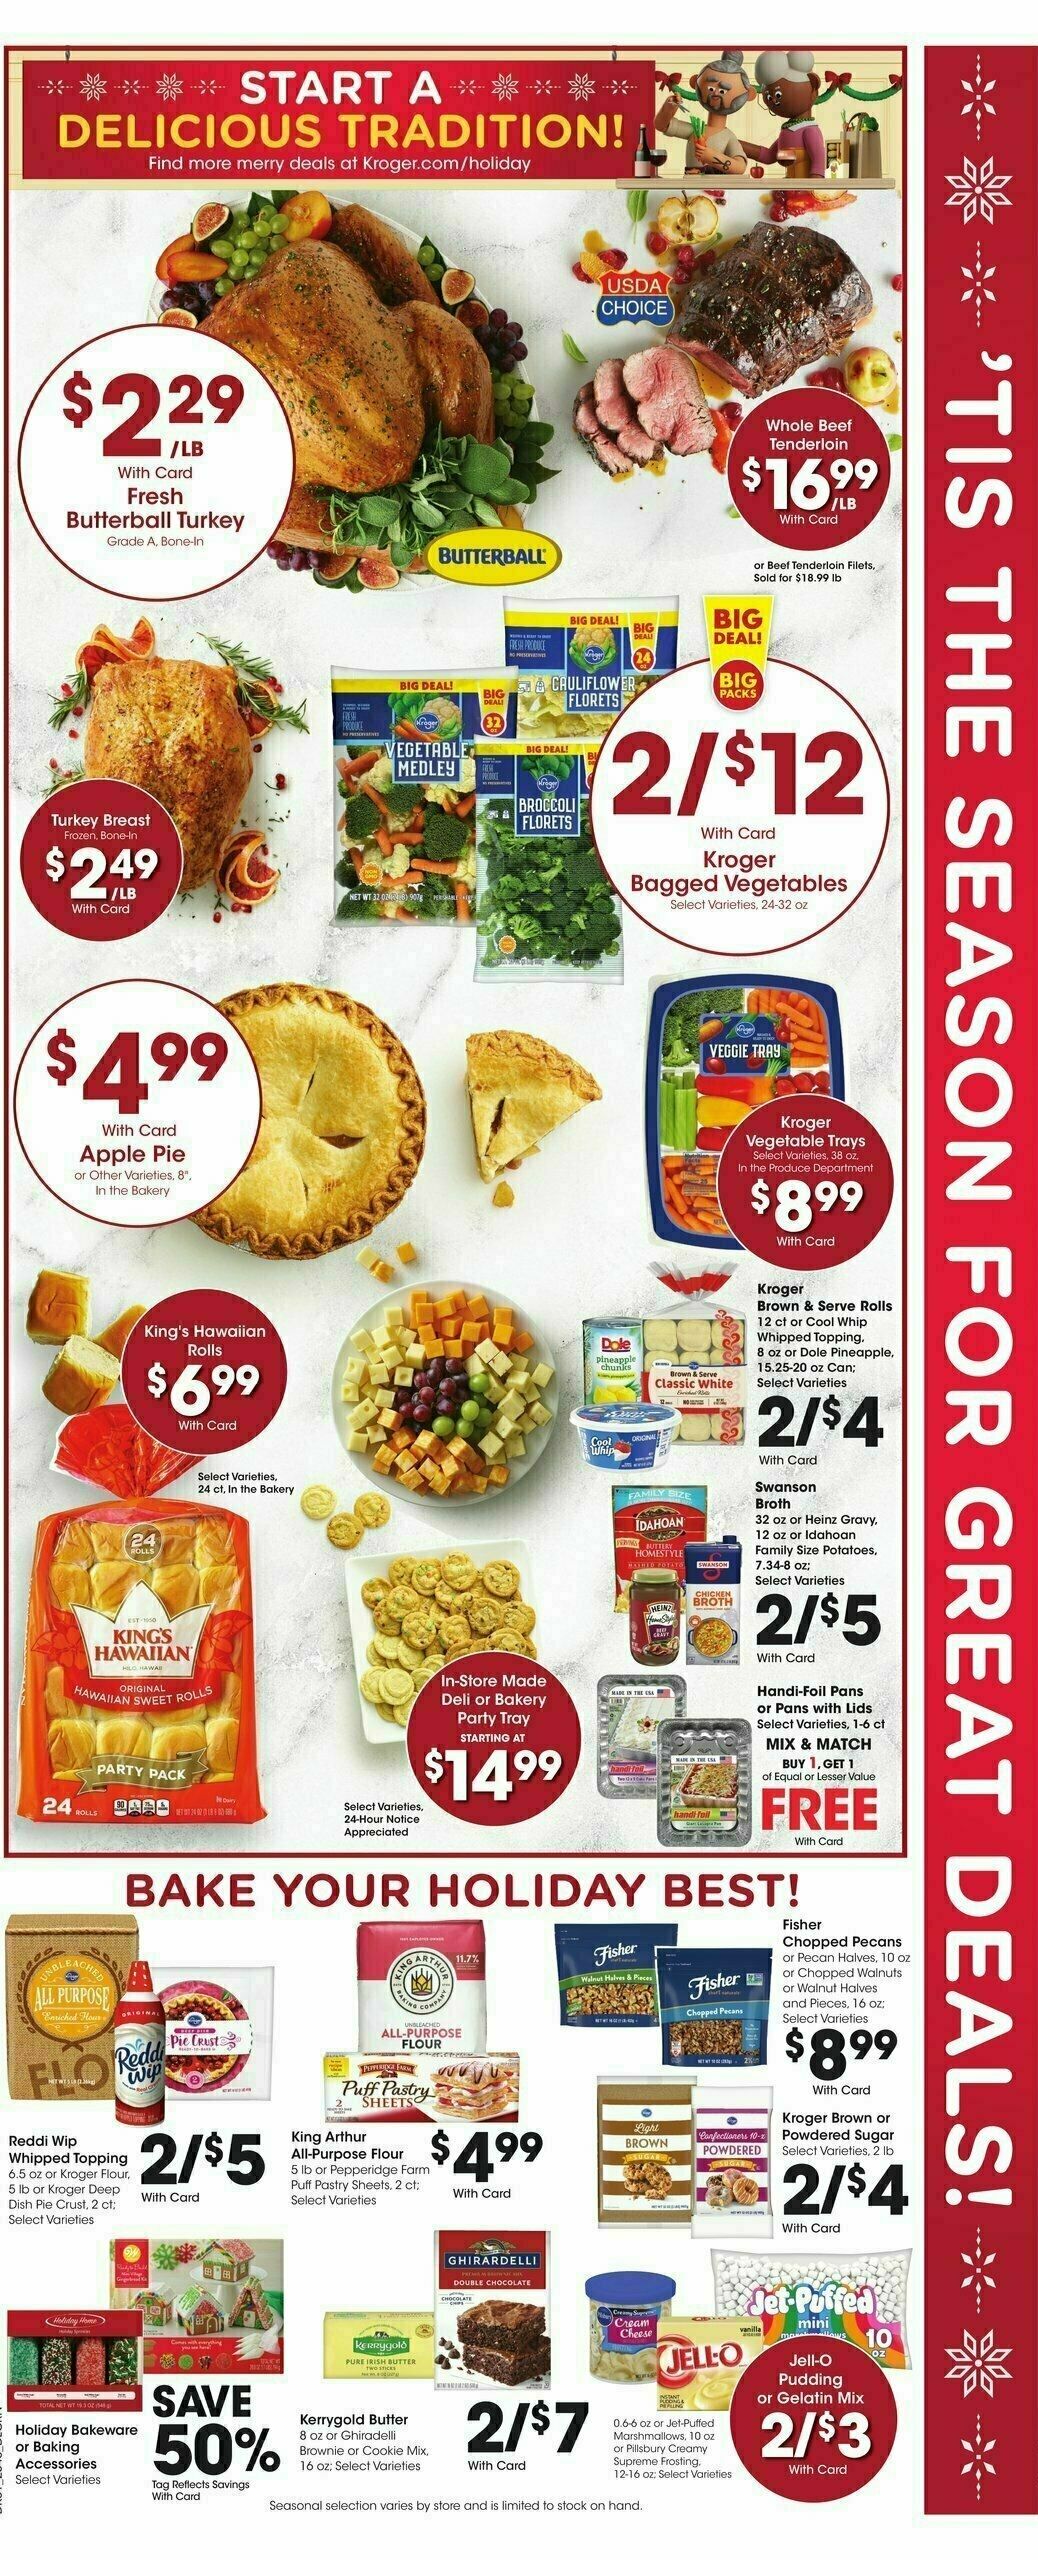 Kroger Weekly Ad from December 13